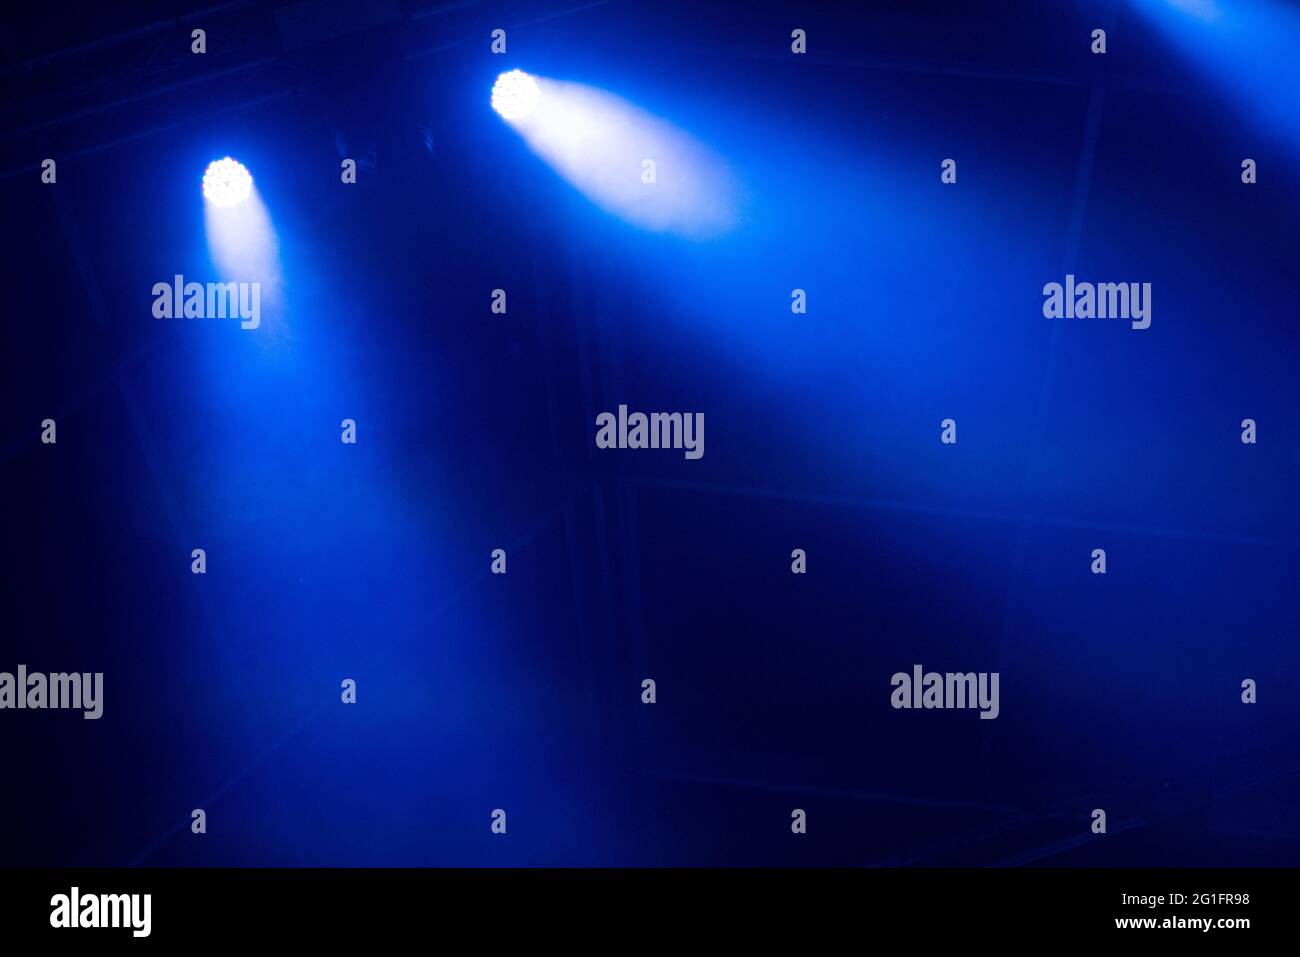 Blue stage lights glowing in the dark. Live music festival concept background Stock Photo